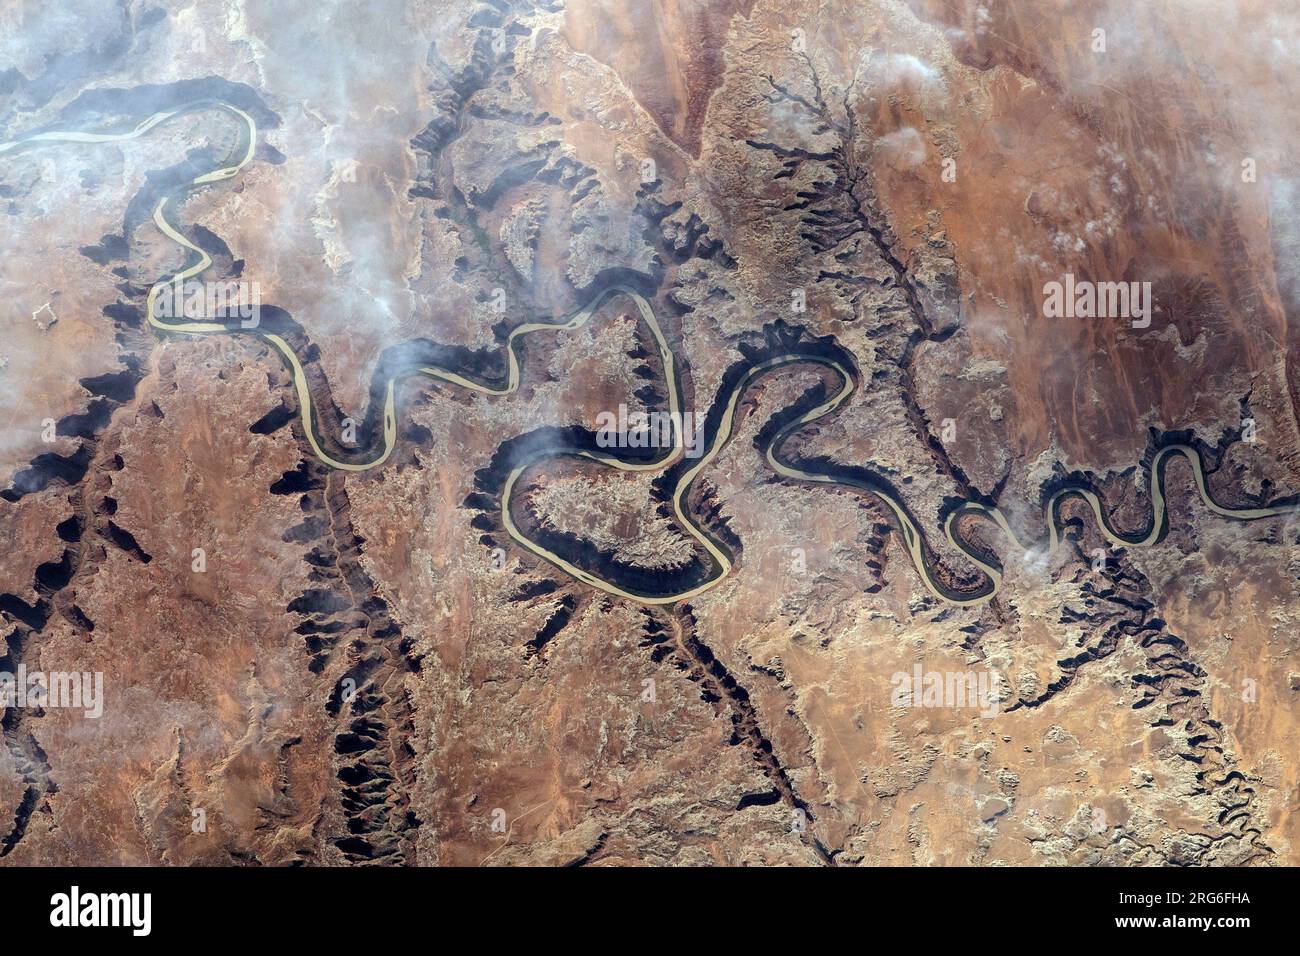 A portion of the Green River and its tributary canyons in the state of Utah, as seen from space. Stock Photo